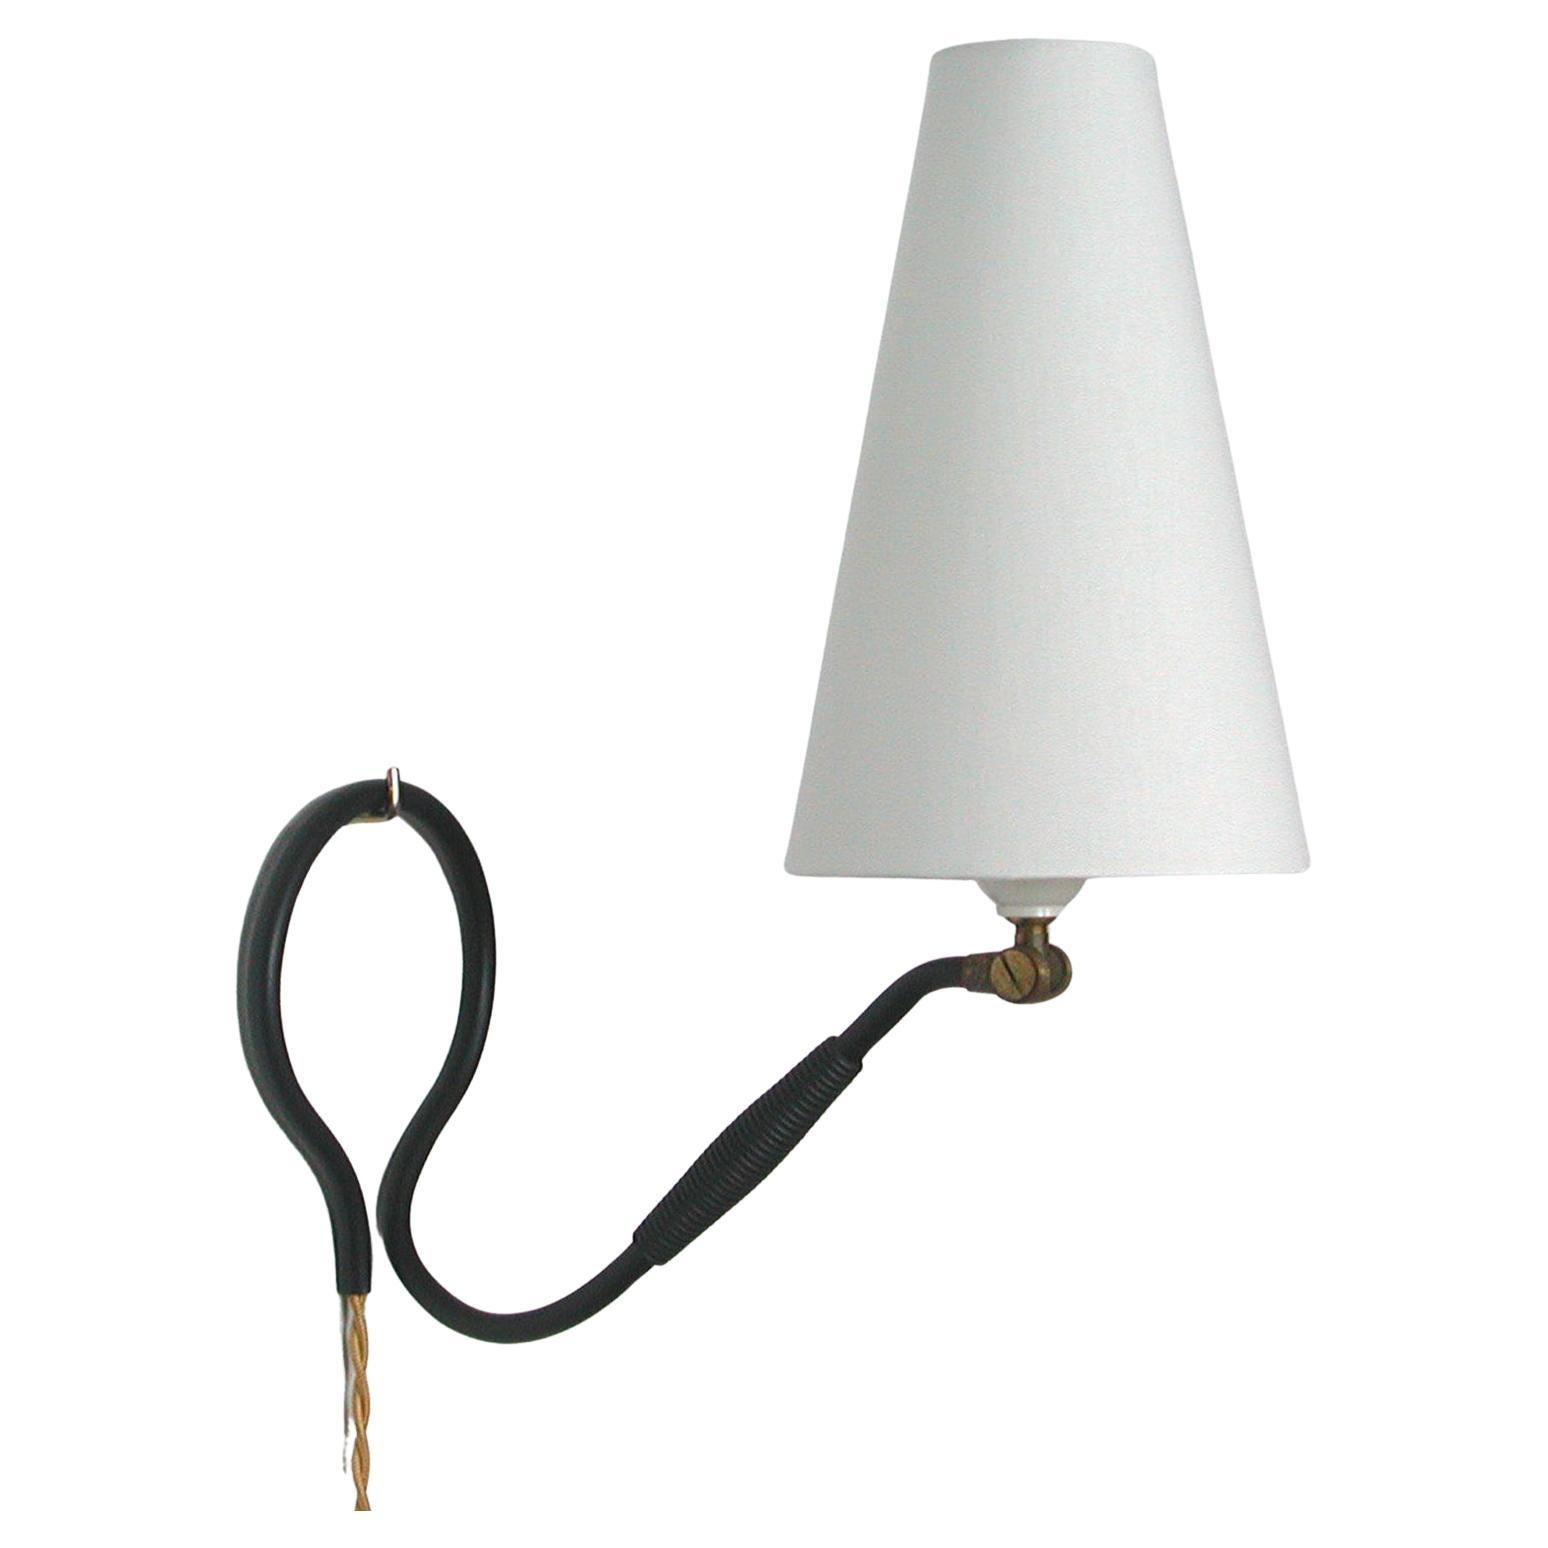 Adjustable Black Brass and Bakelite Wall or Table Lamp 306 by Kaare Klint, 1950s For Sale